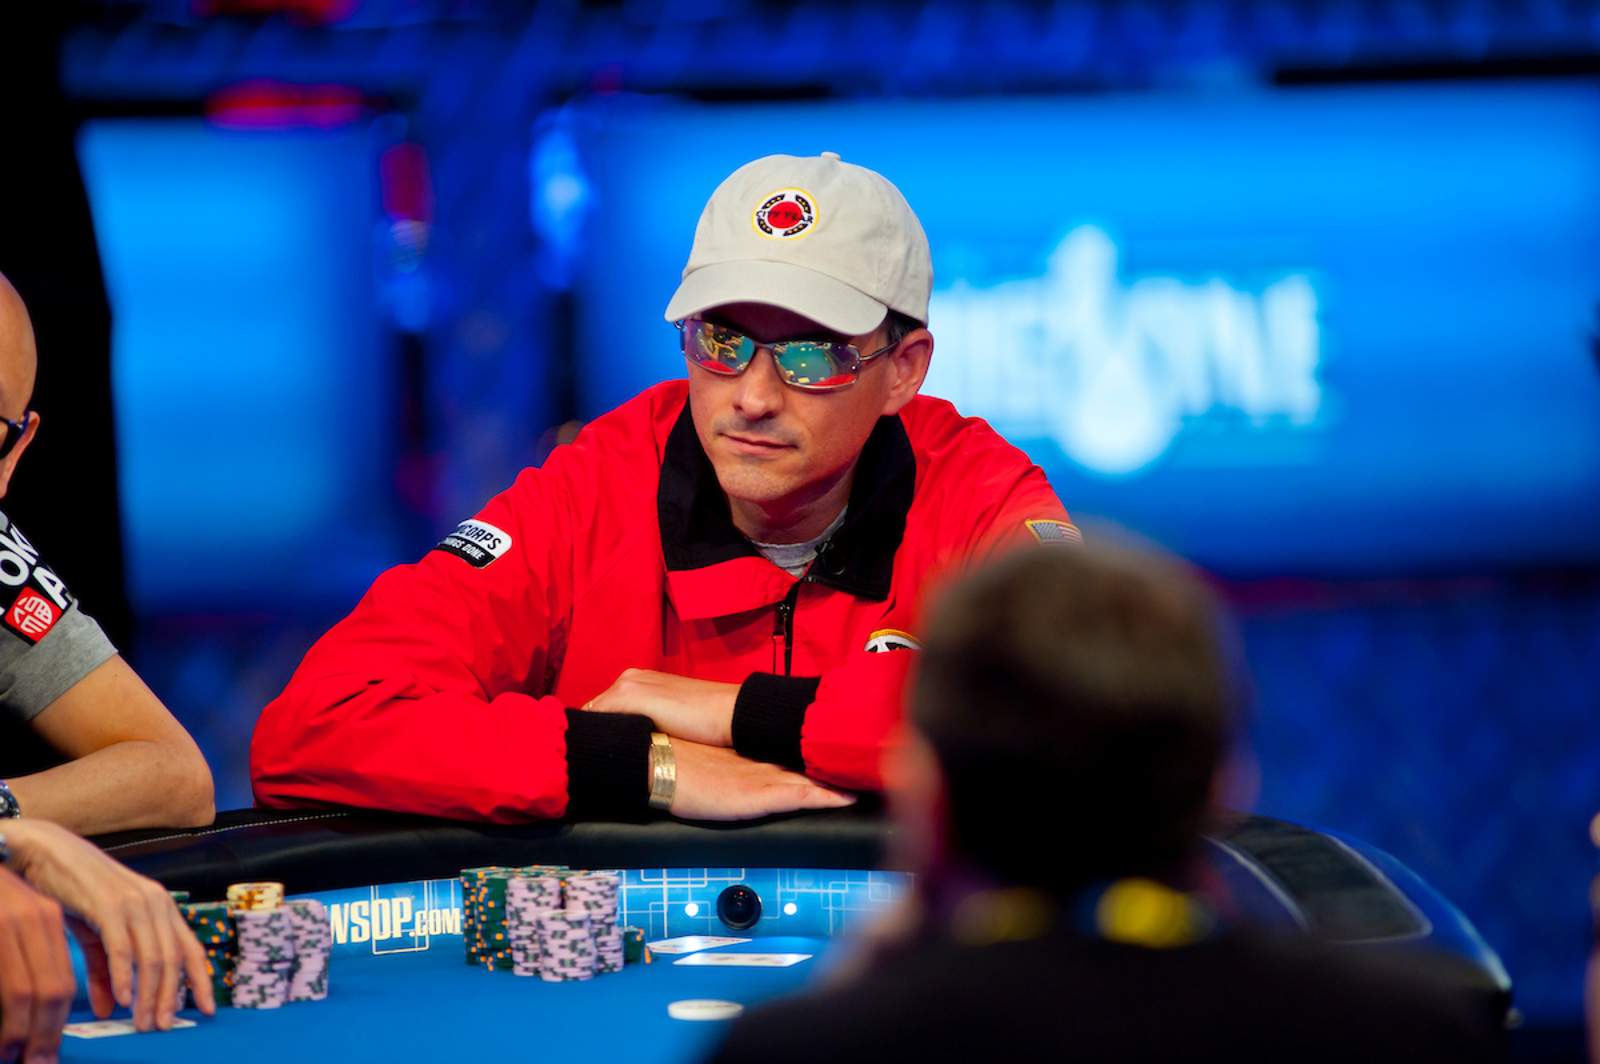 25 Days of SHRBowl: From Stocks to High-Stakes